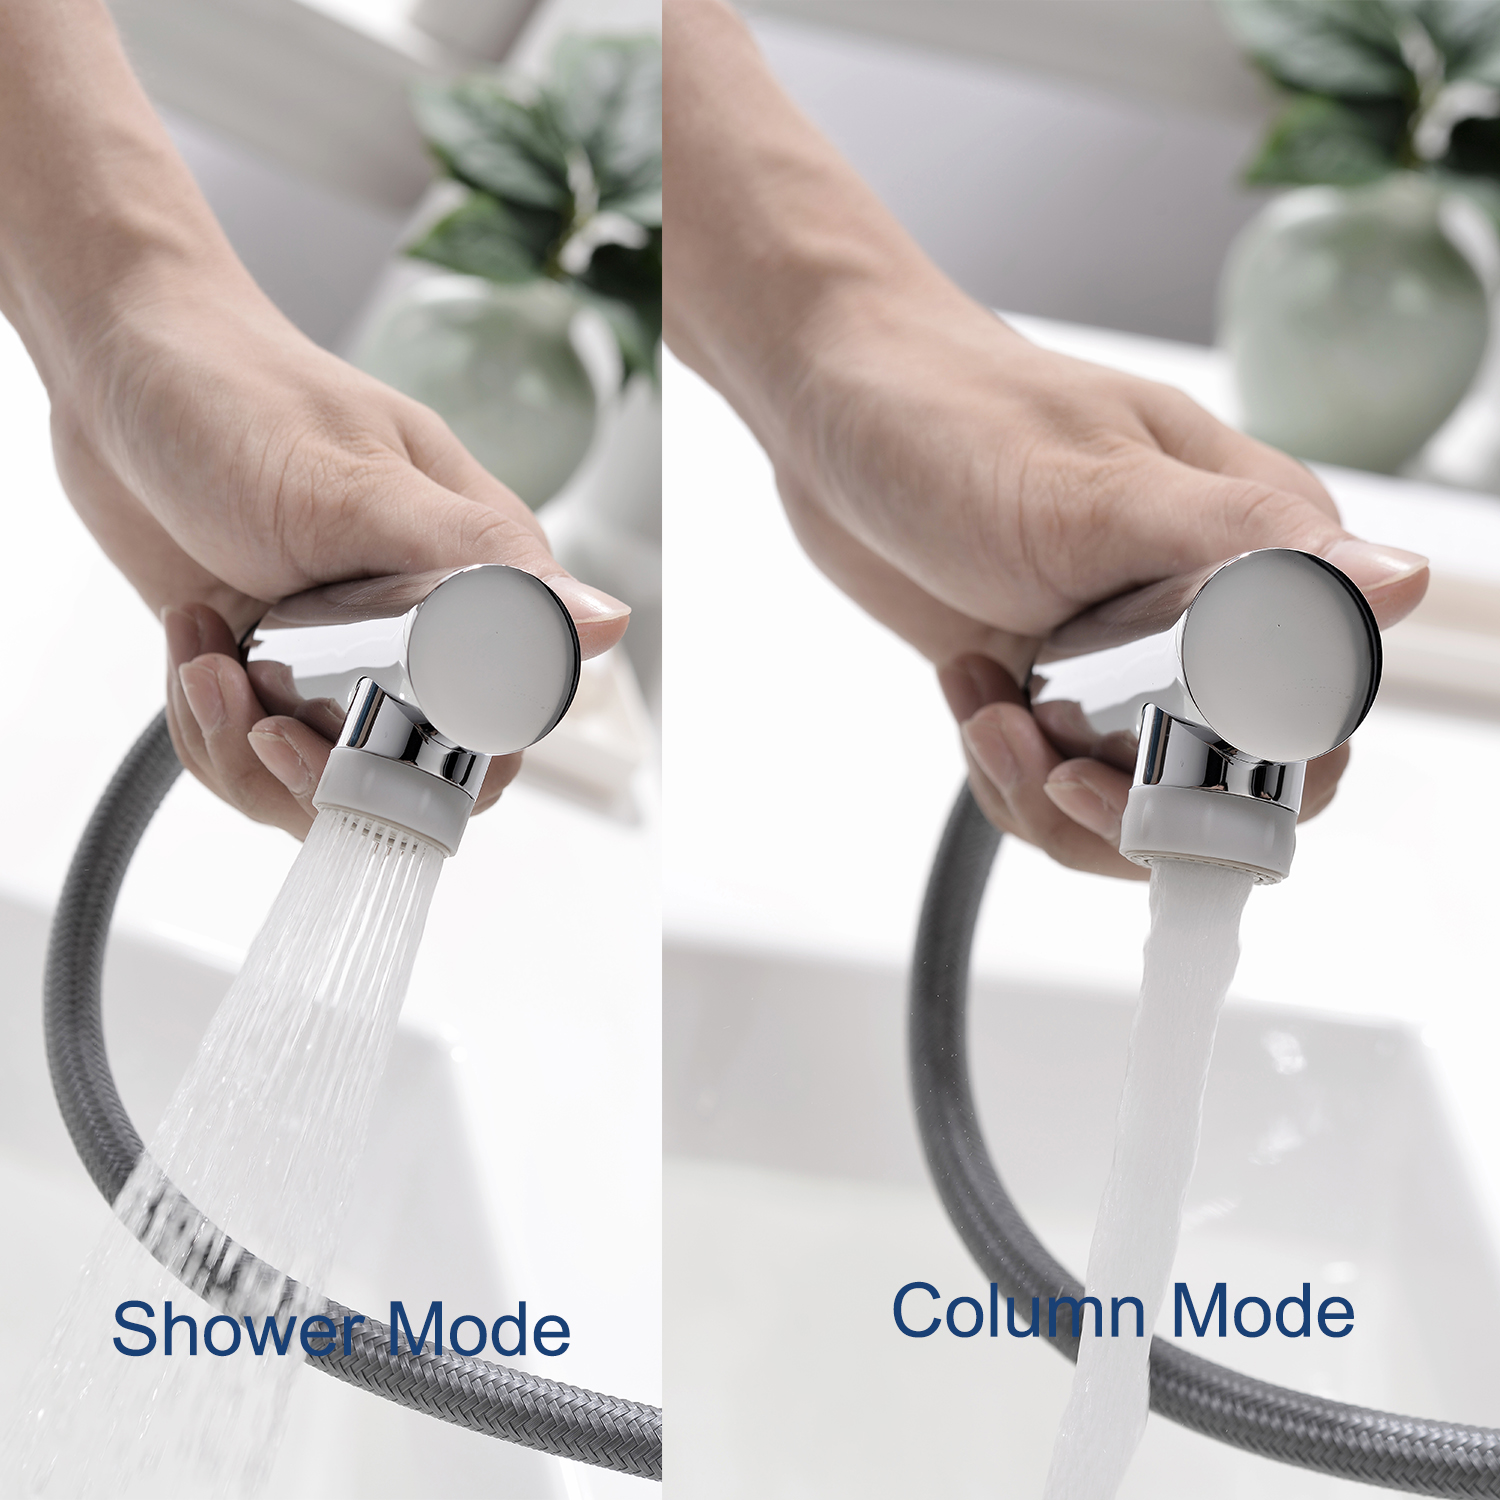 Hot Sales Long Neck Hose Bathroom Faucet With pull out sprayer